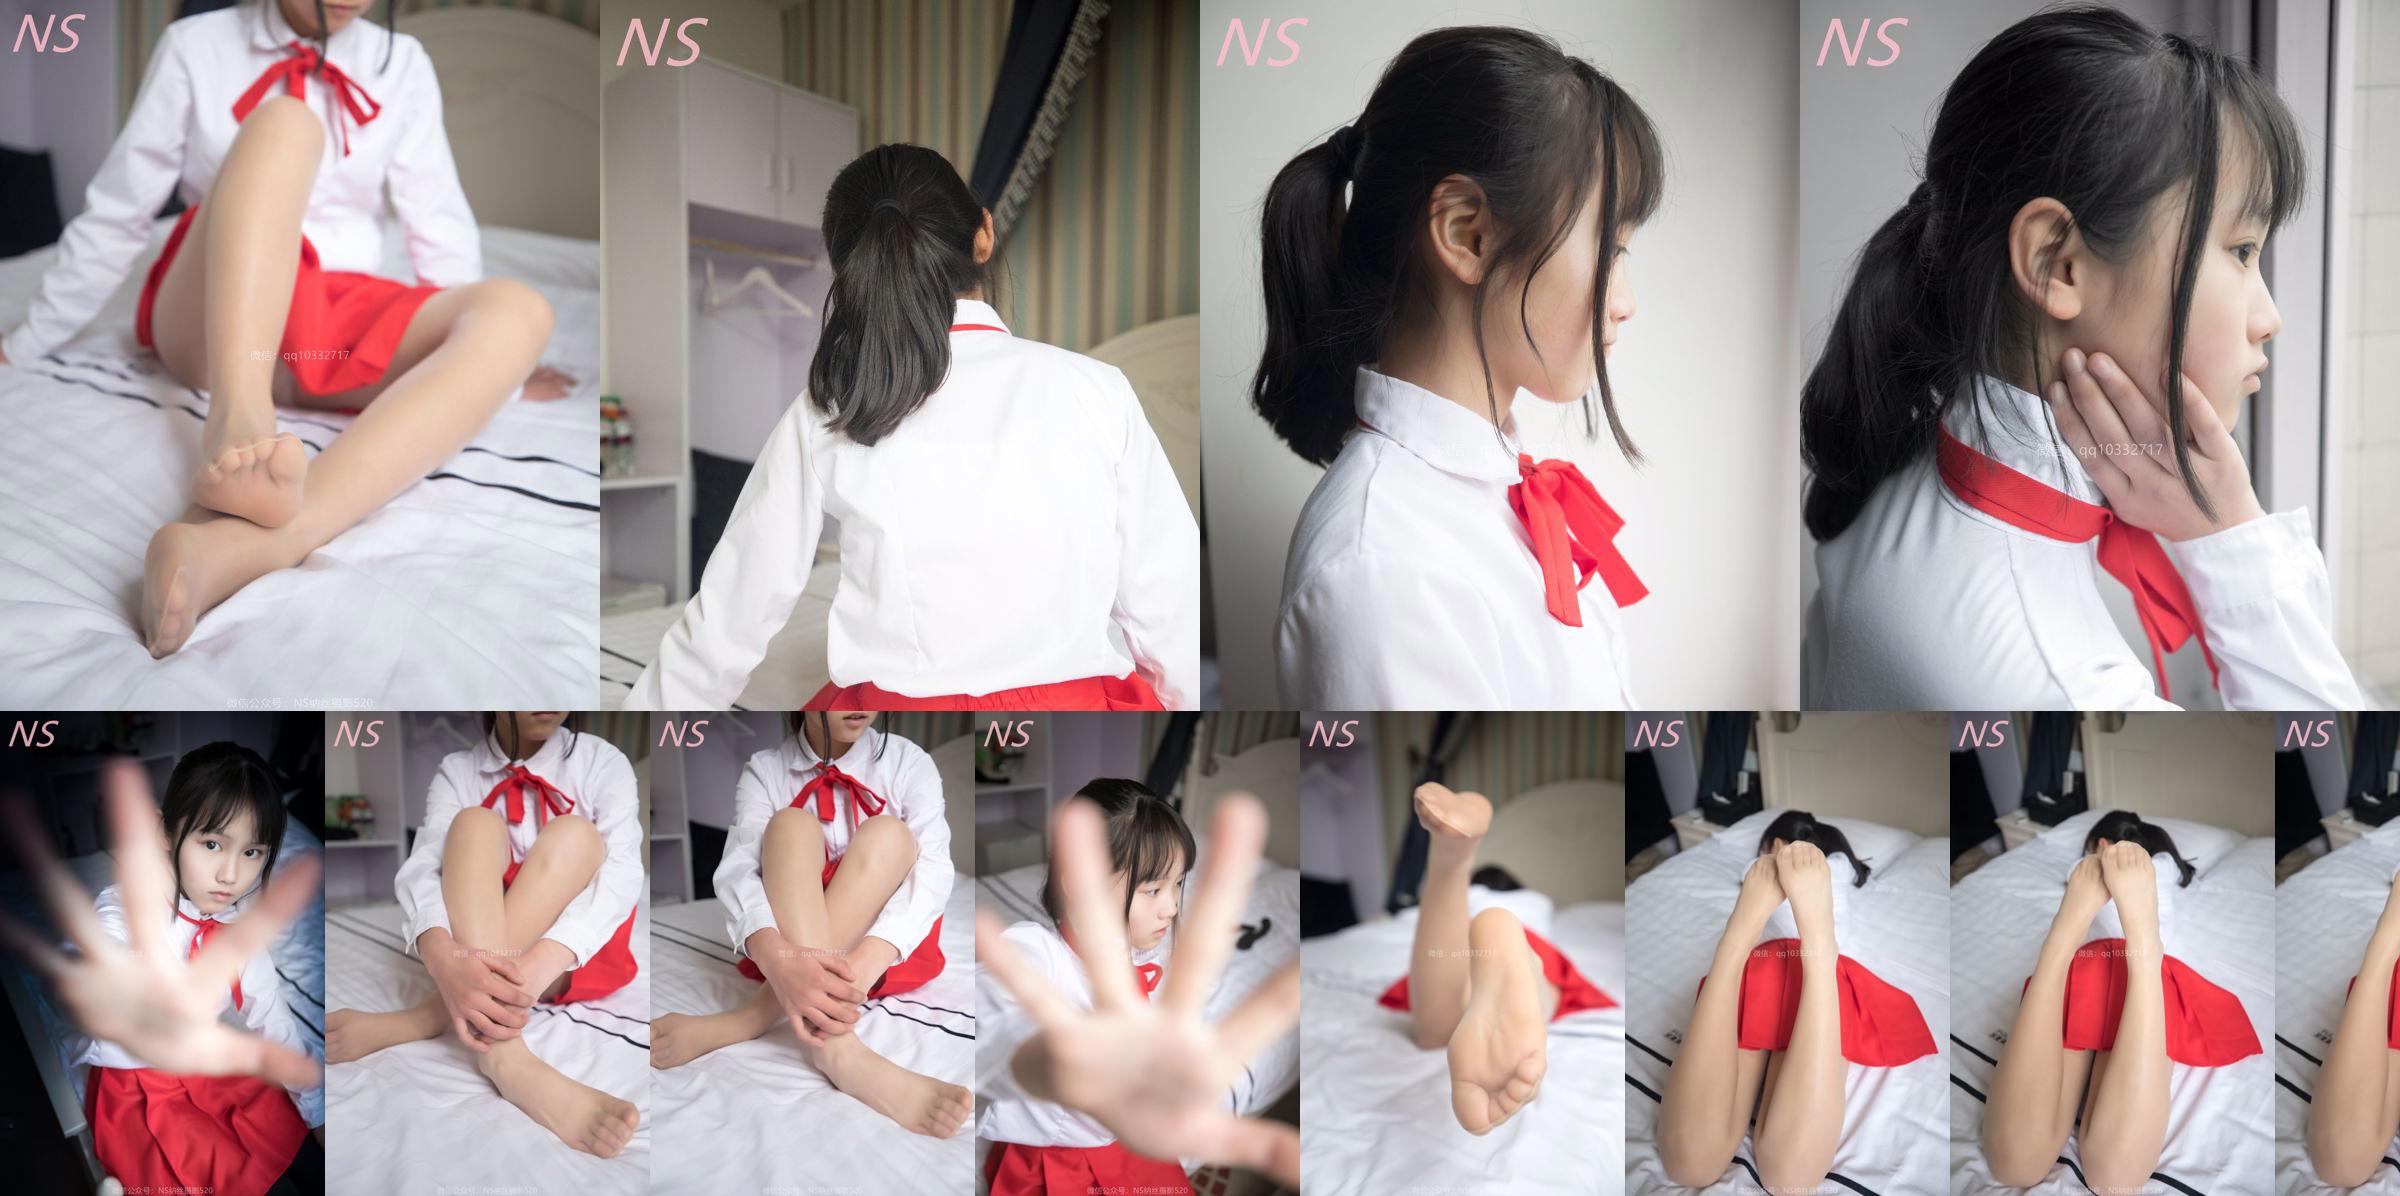 Xiaoli "The Temptation of Pork in a Red Miniskirt" [Nasi Photography] No.3b6ca7 Page 1